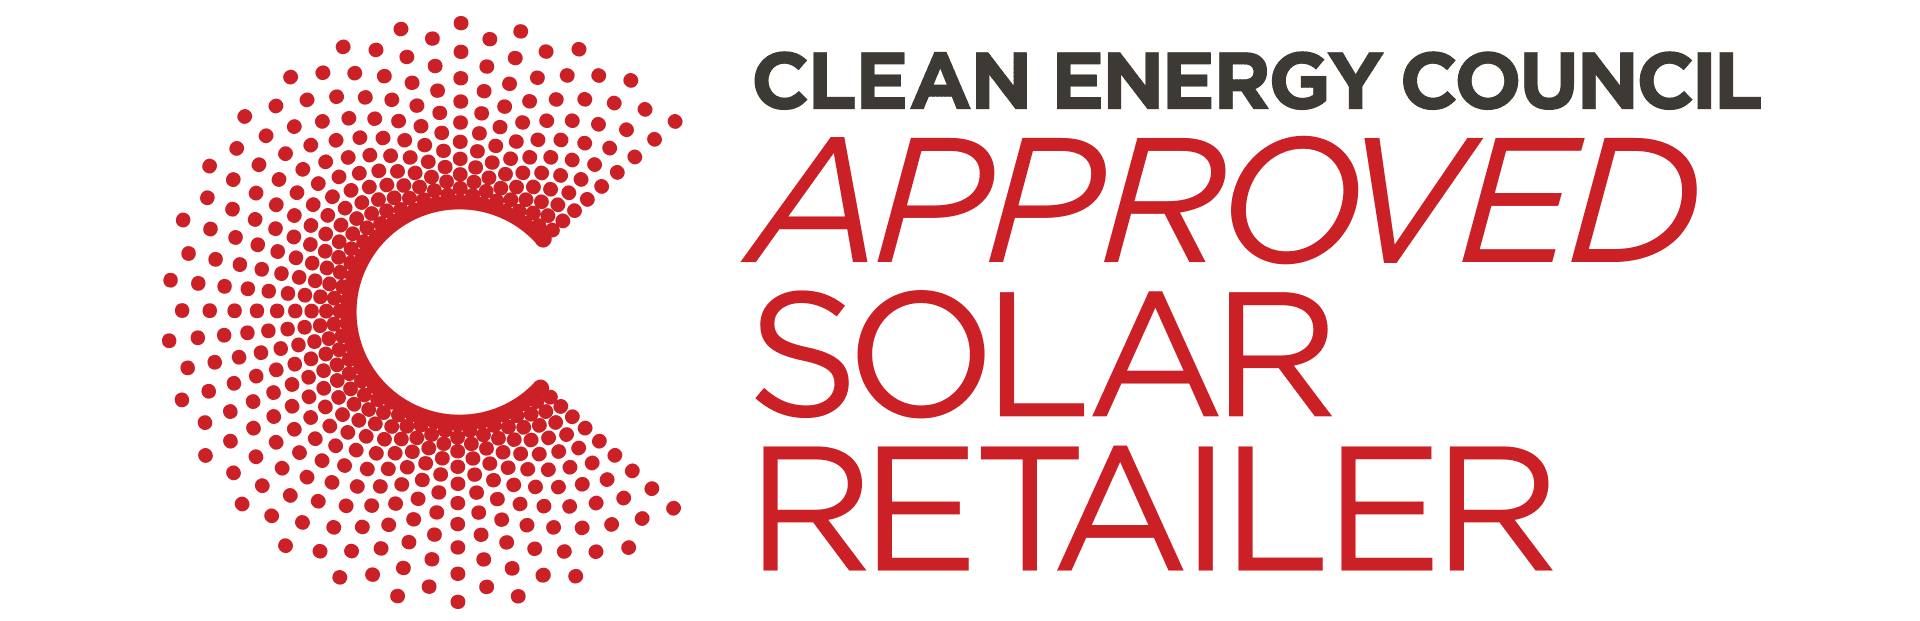 Clean Energy Council: Approved Solar Retailer